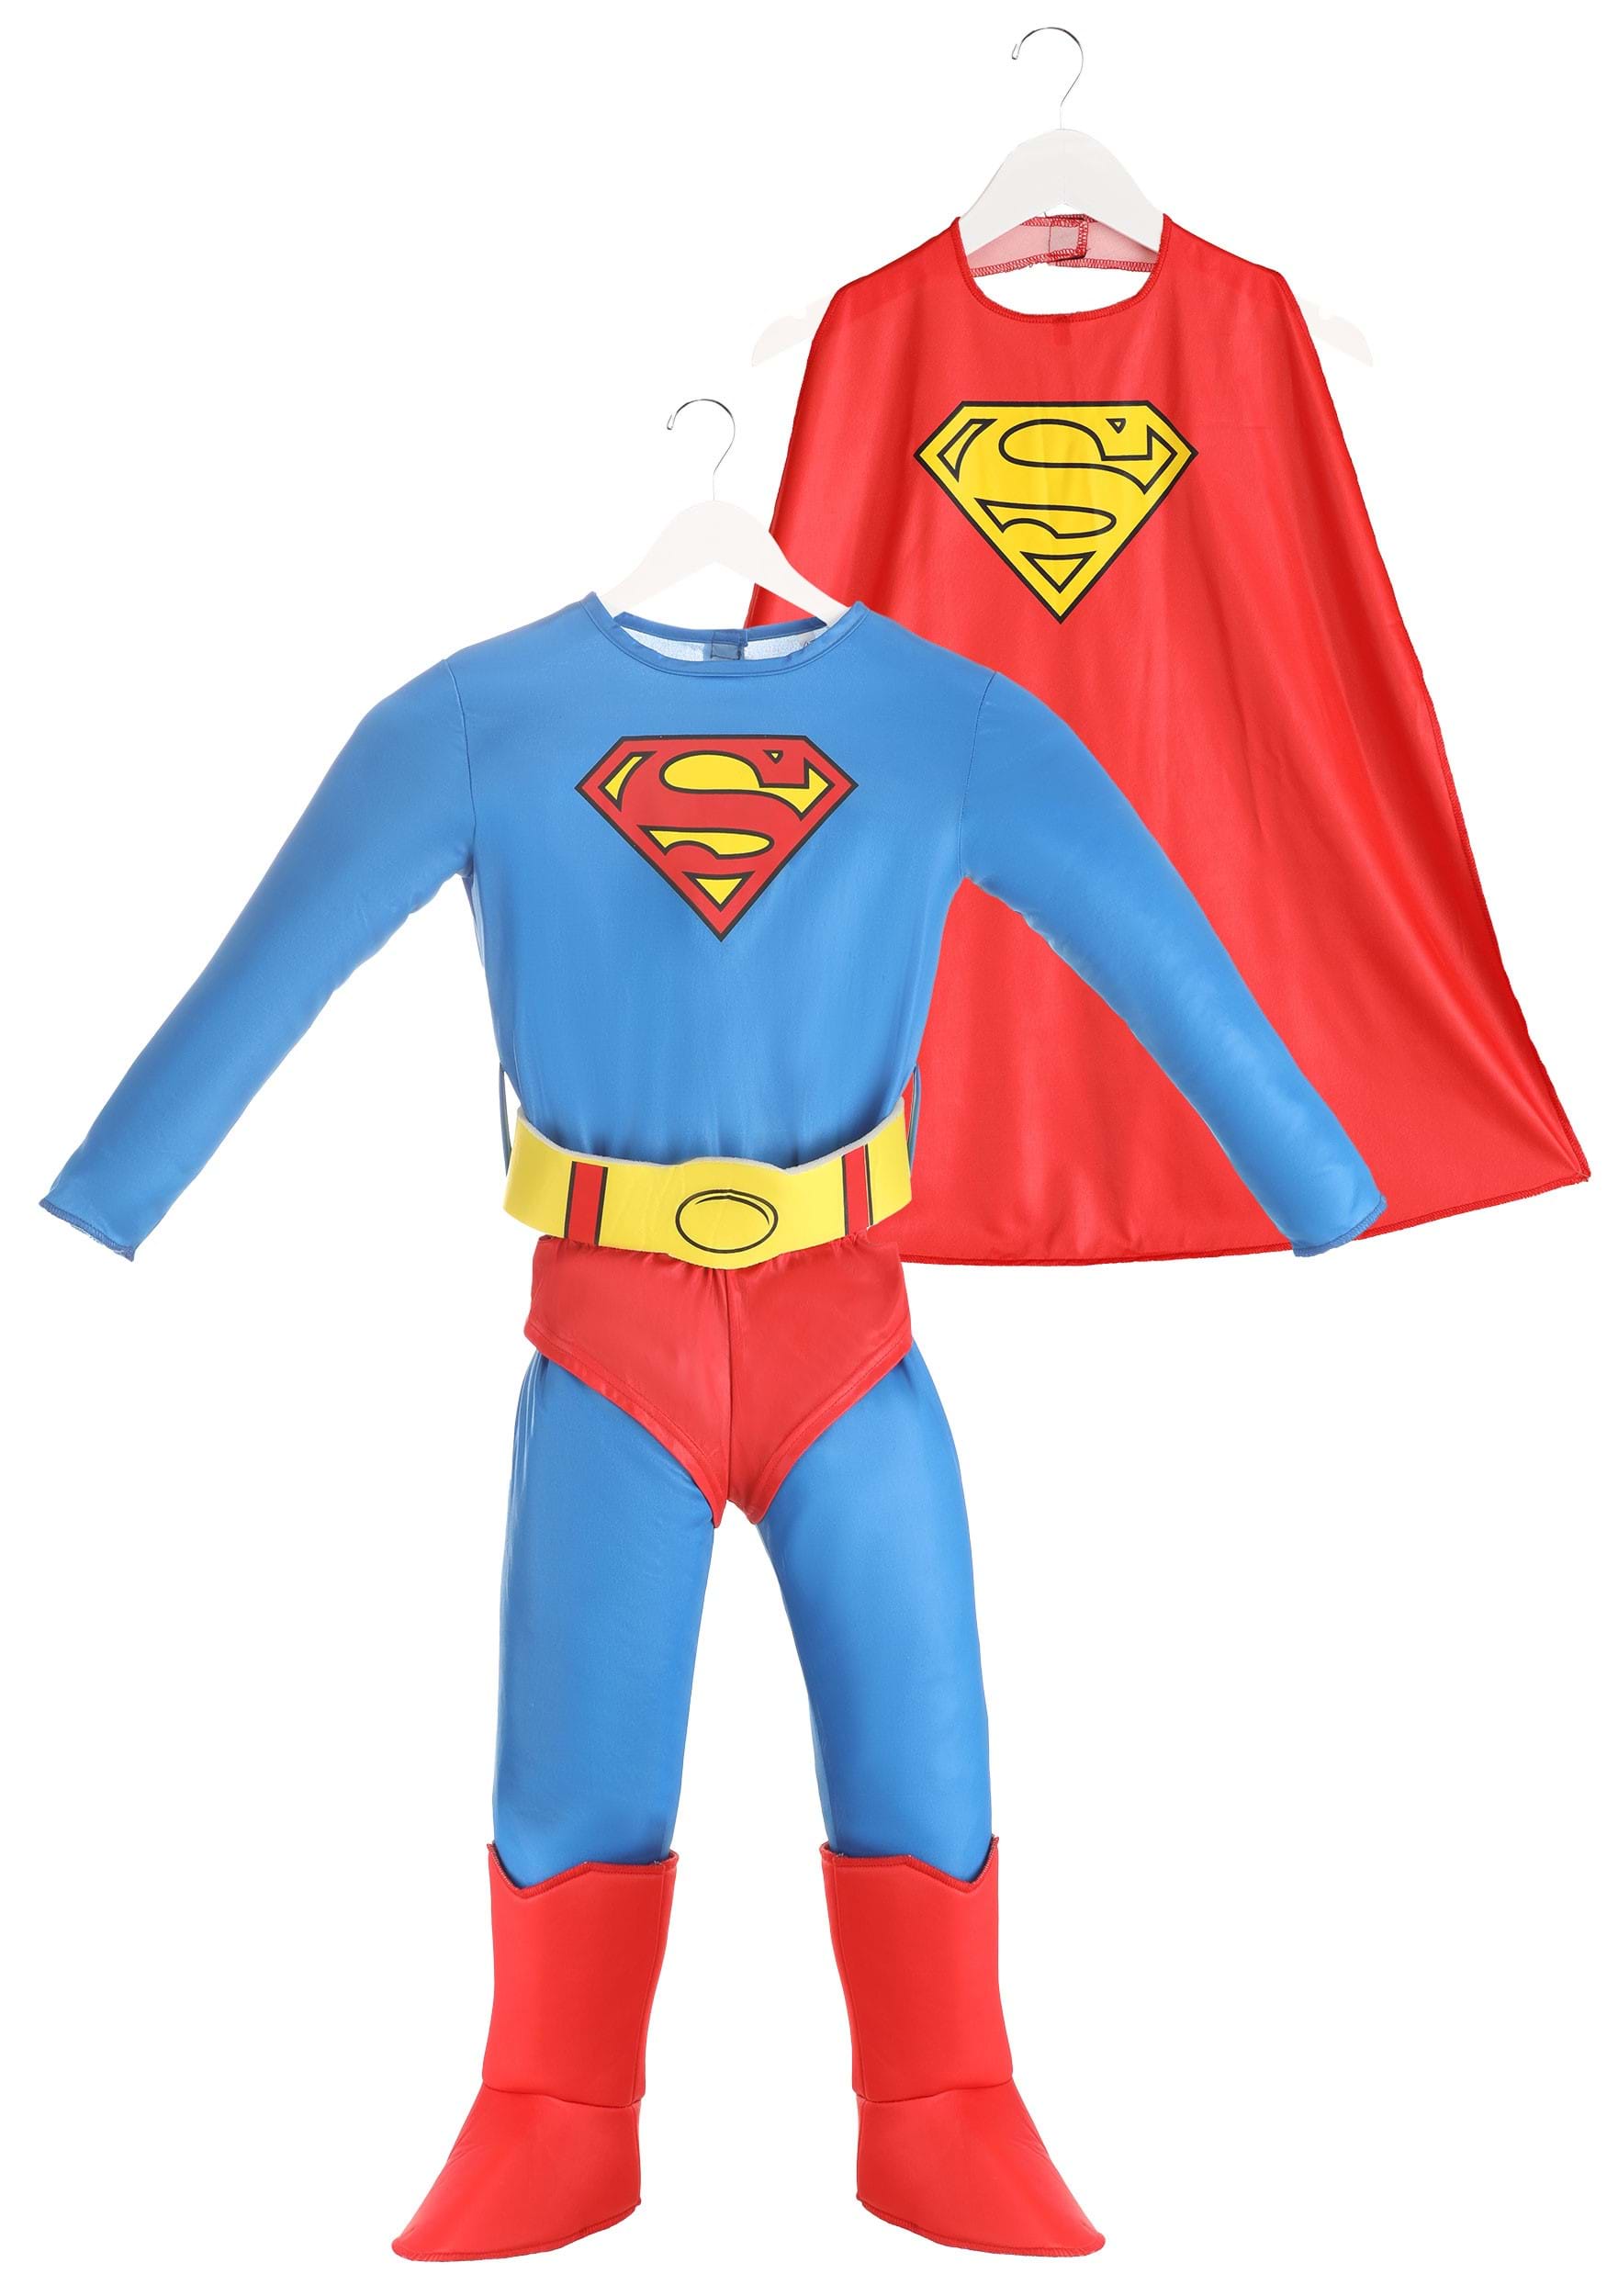 Superman Costumes For Girls